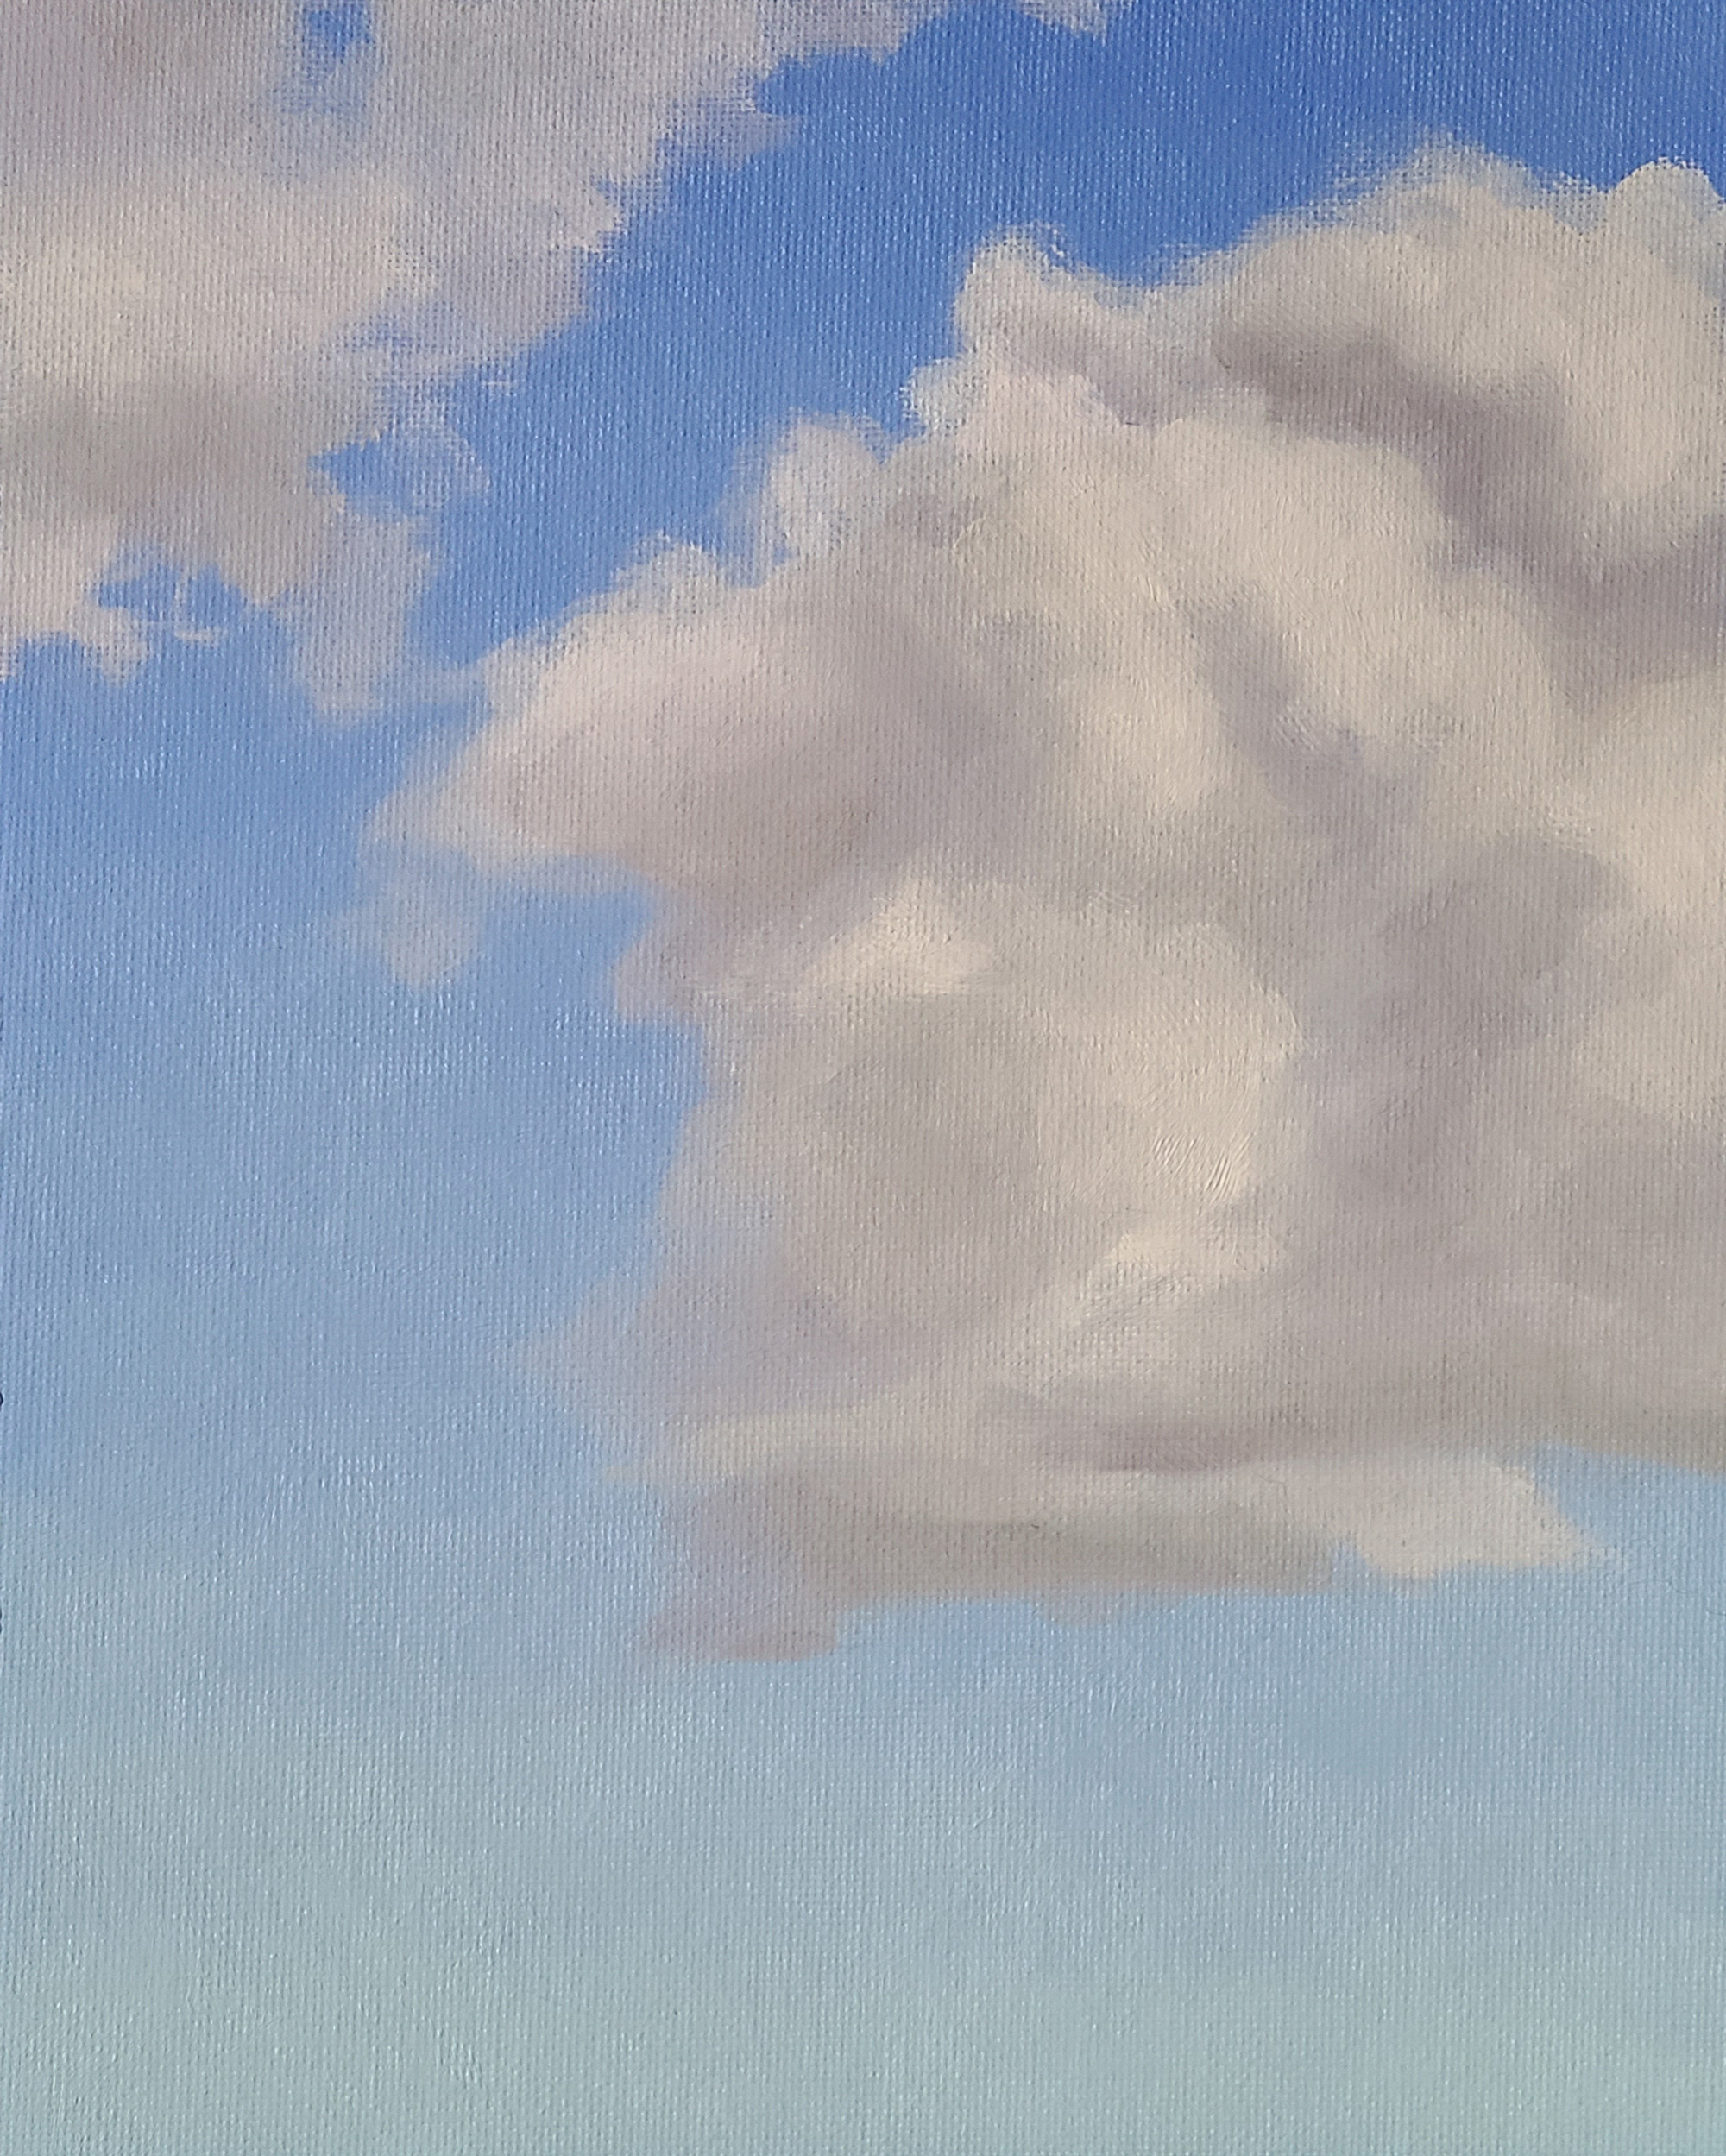 two fluffy cumulus clouds against a light blue sky